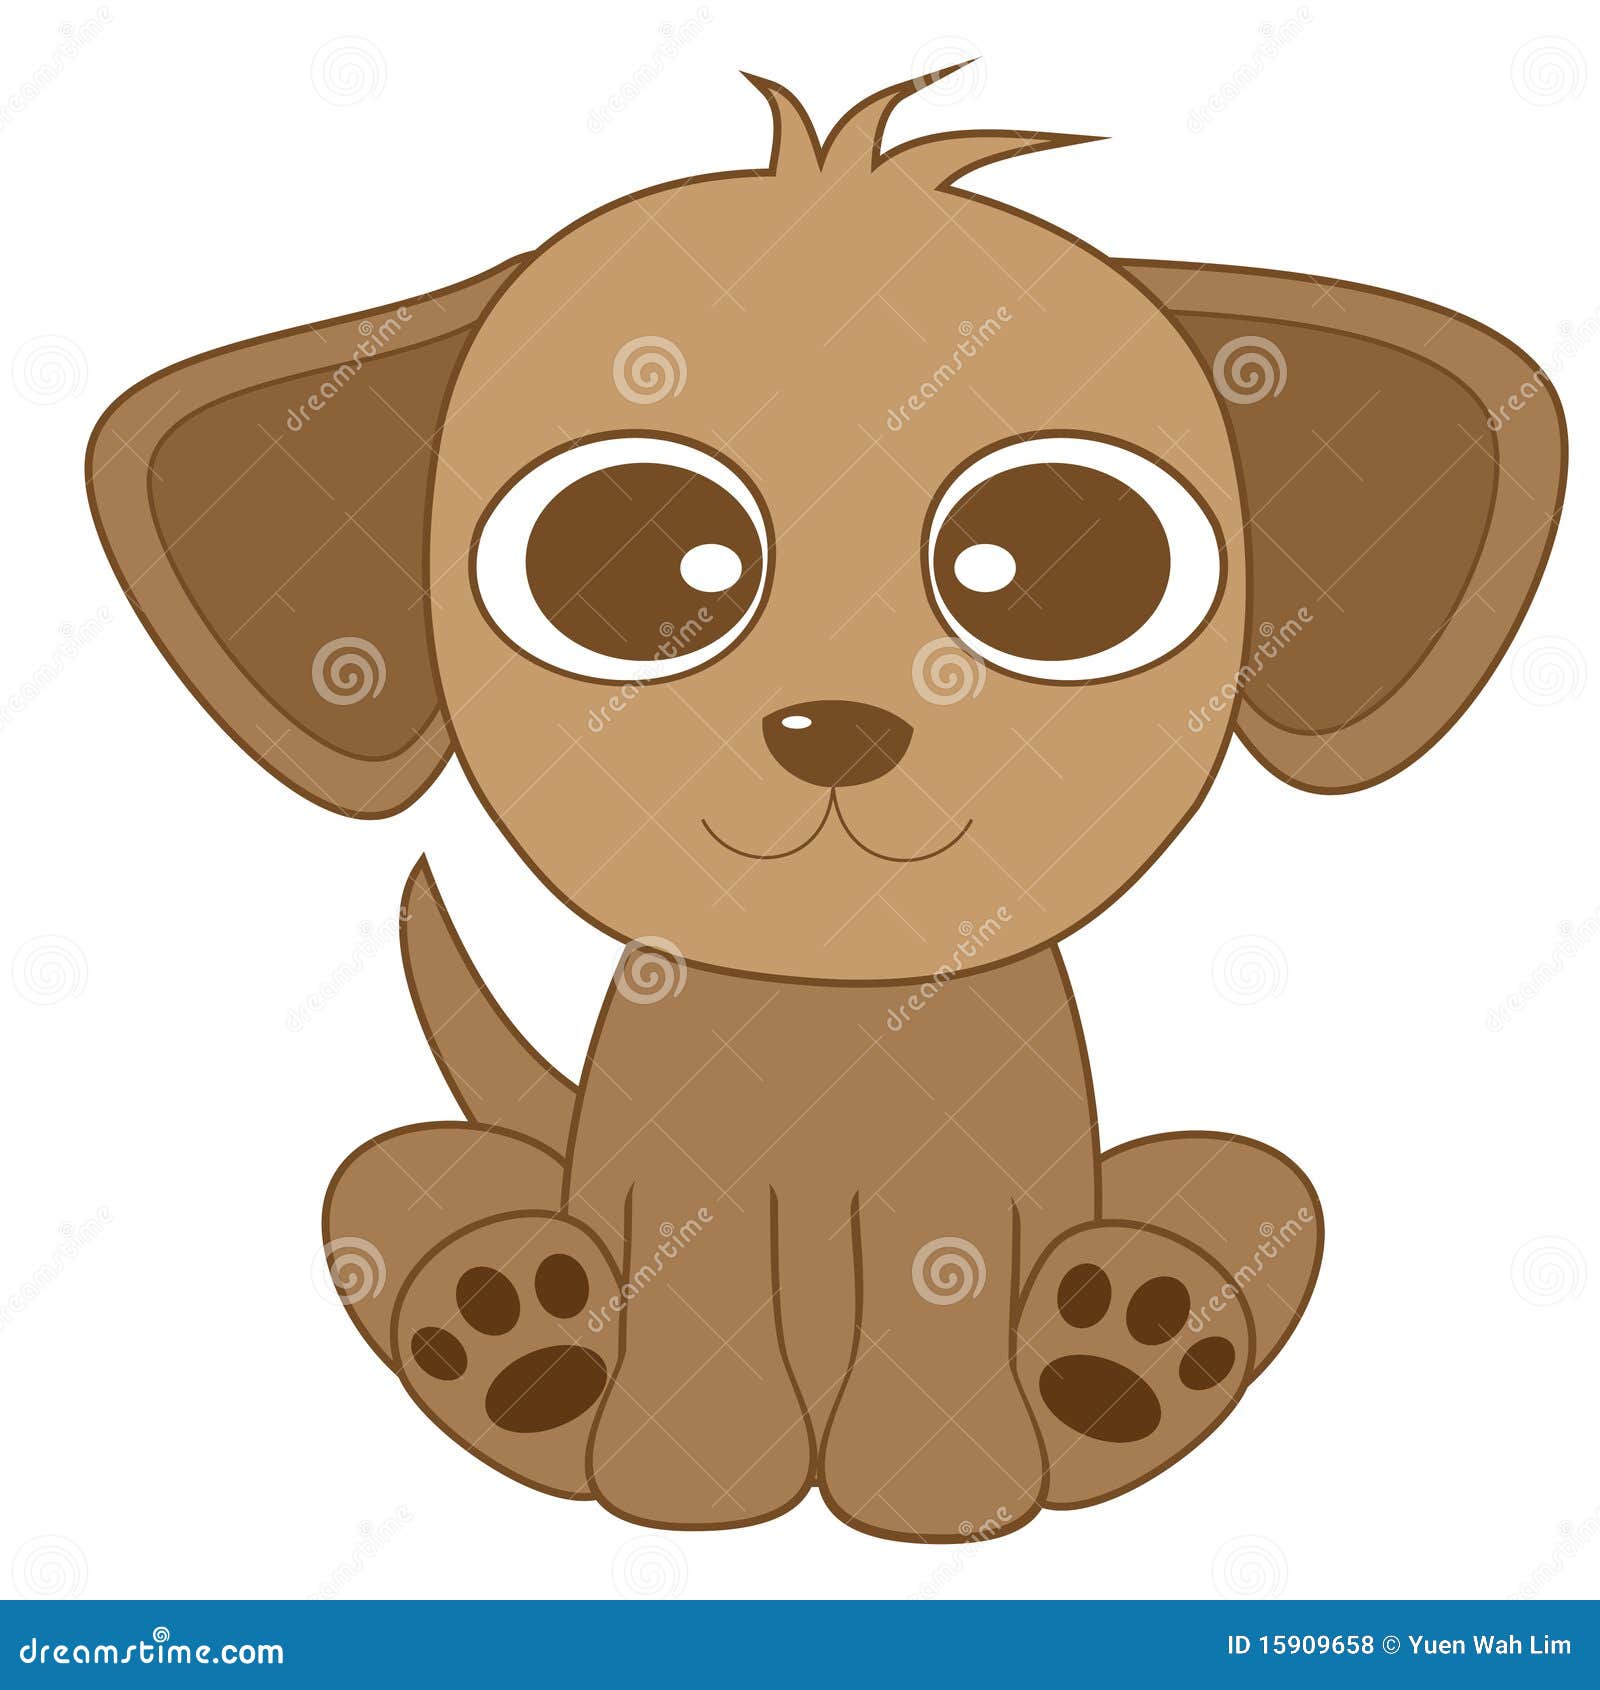 Cute Looking Brown Dog With Big Eyes And Big Ears Illustration 15909658 -  Megapixl